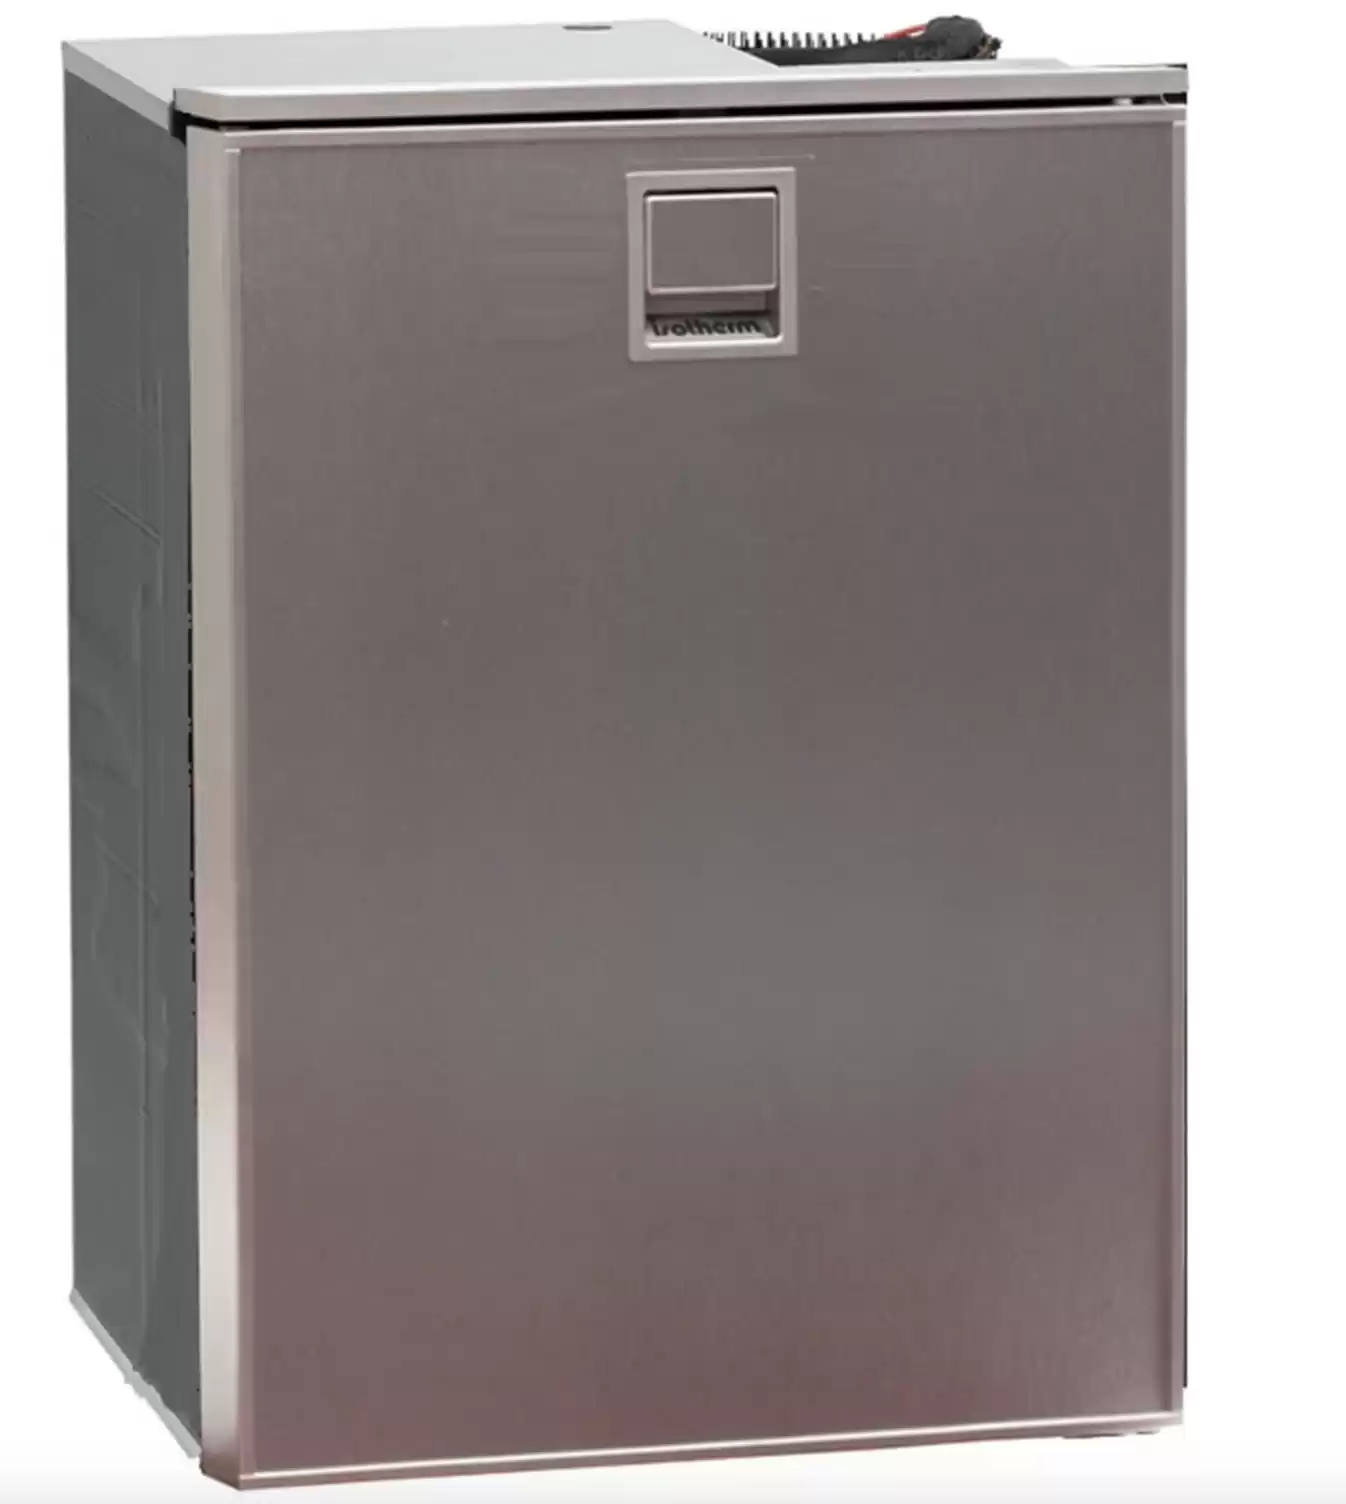 Isotherm Cruise 130L Upright Refrigerator